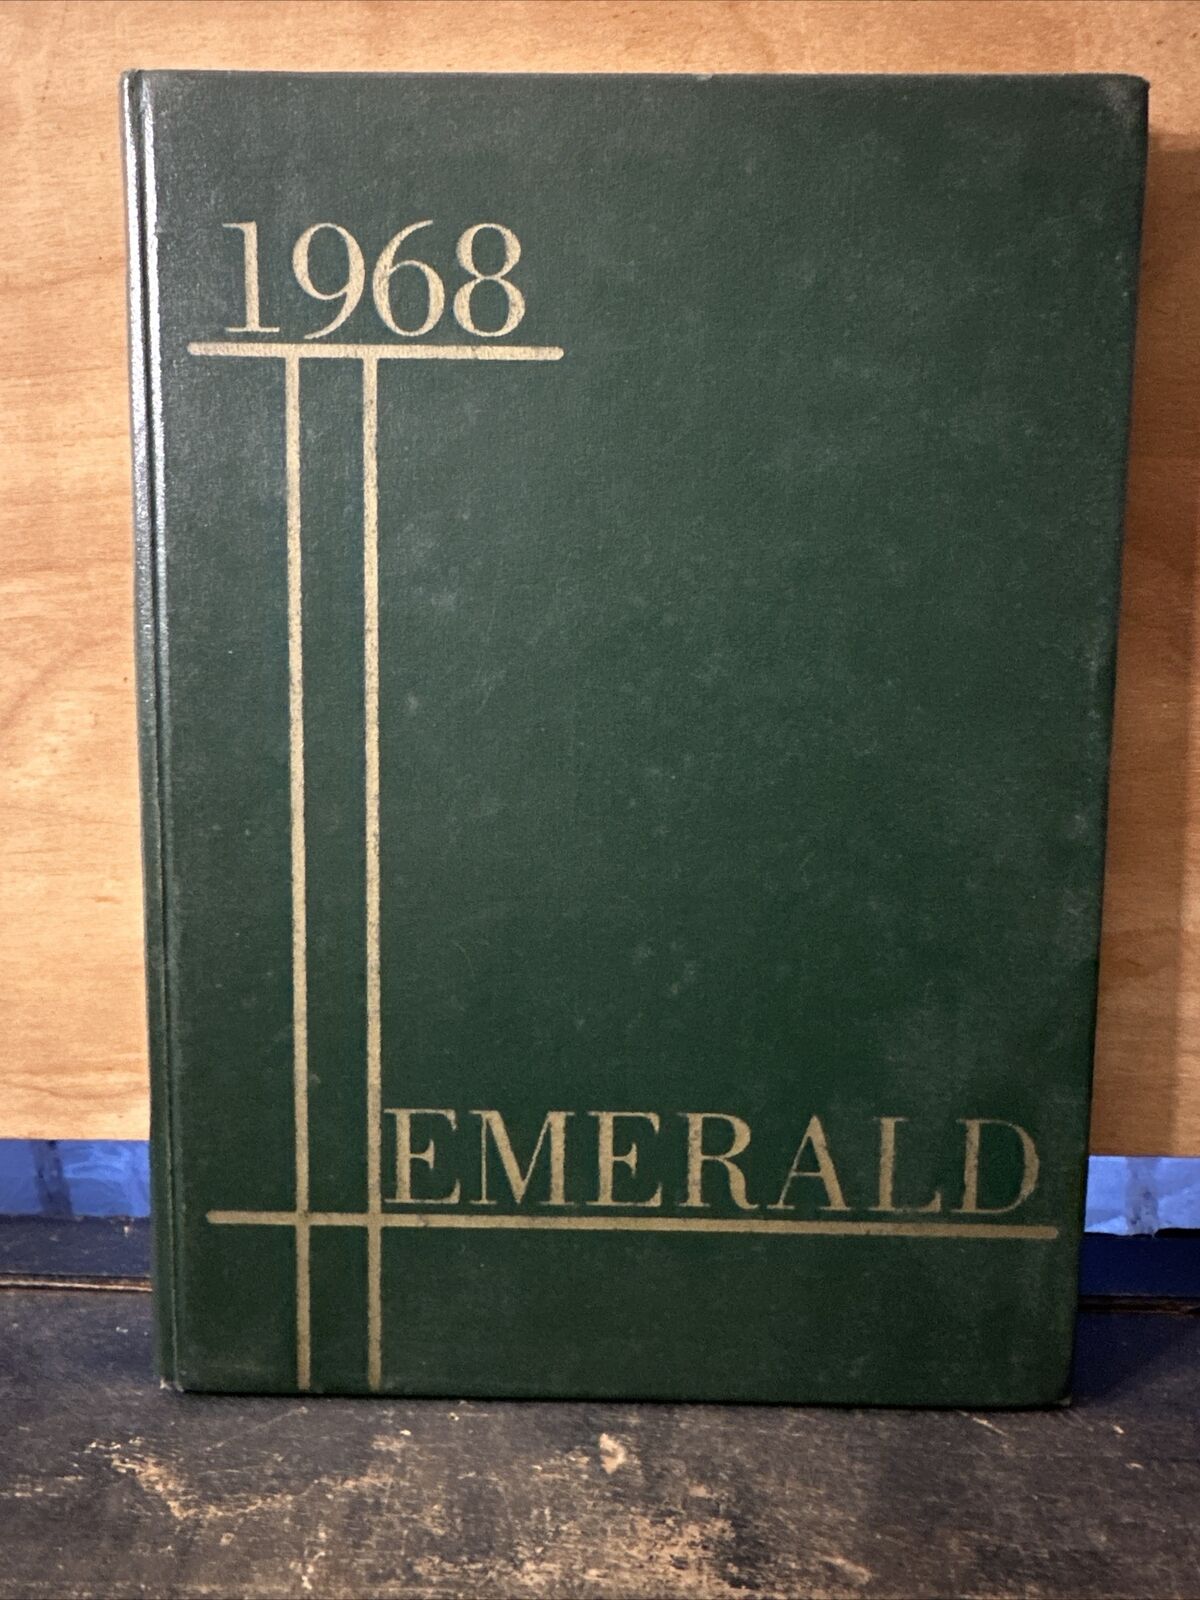 High School yearbook Coventry Connecticut 1968 Emerald